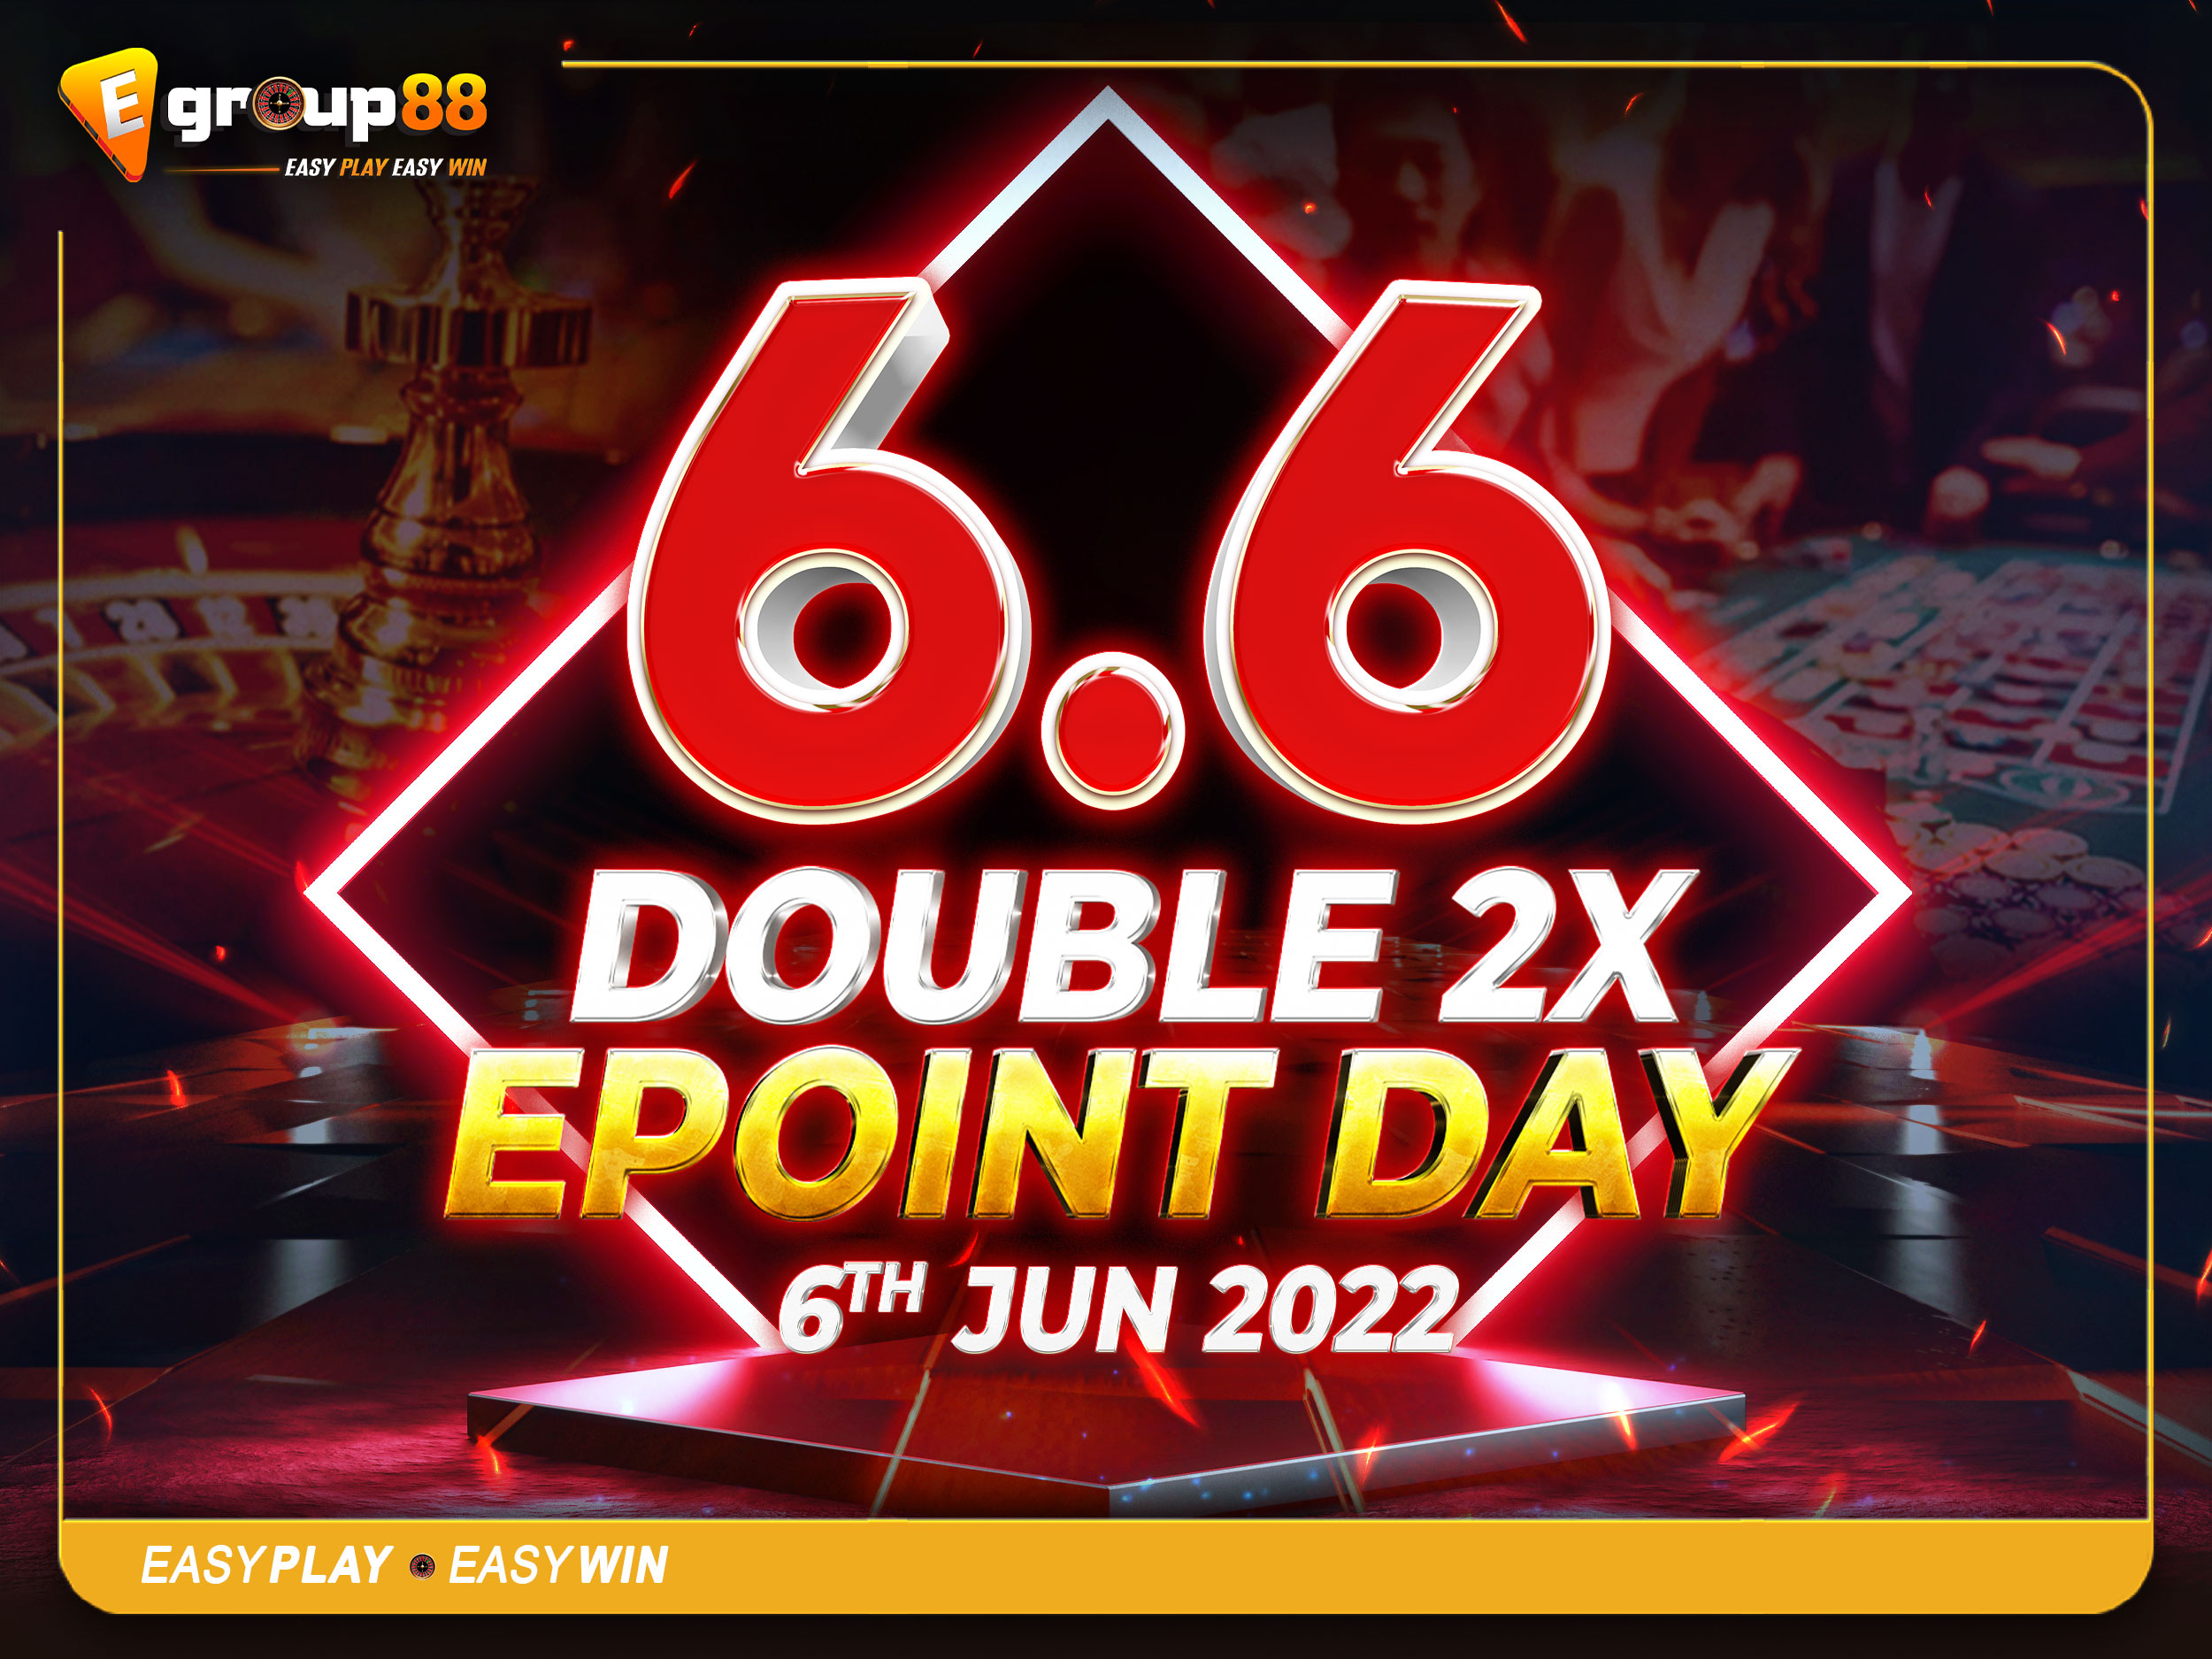 6.6 Double 2x Epoints Day